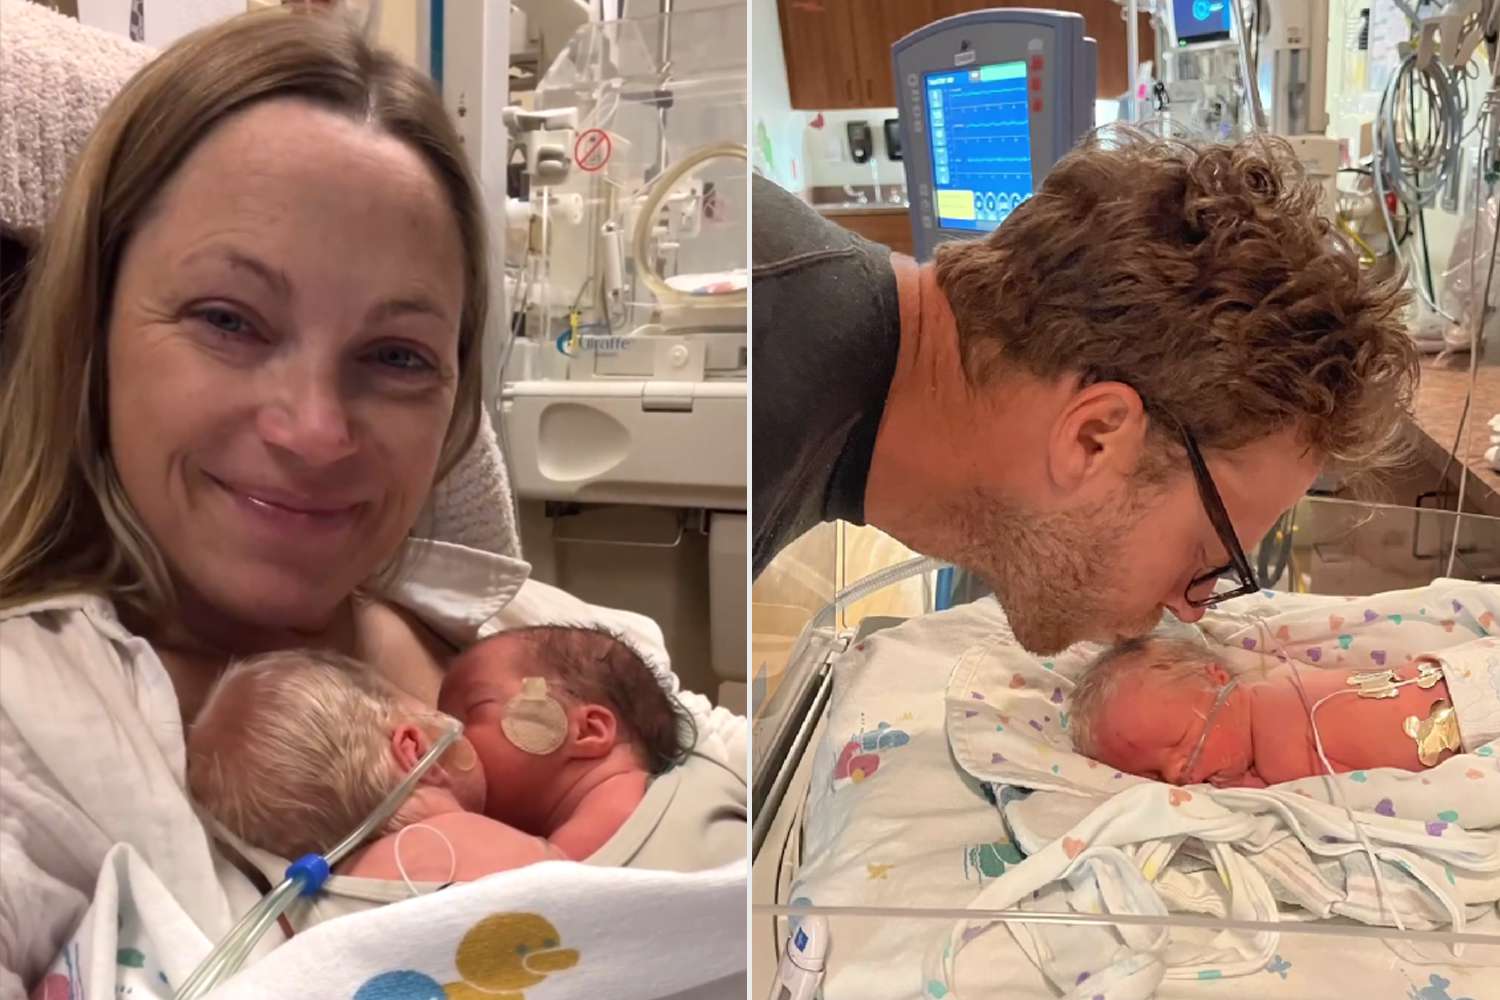 'Bachelor' Alum Sarah Herron Welcomes Twin Girls with Husband Dylan Brown 'A Whopping 7.5 Weeks Early'